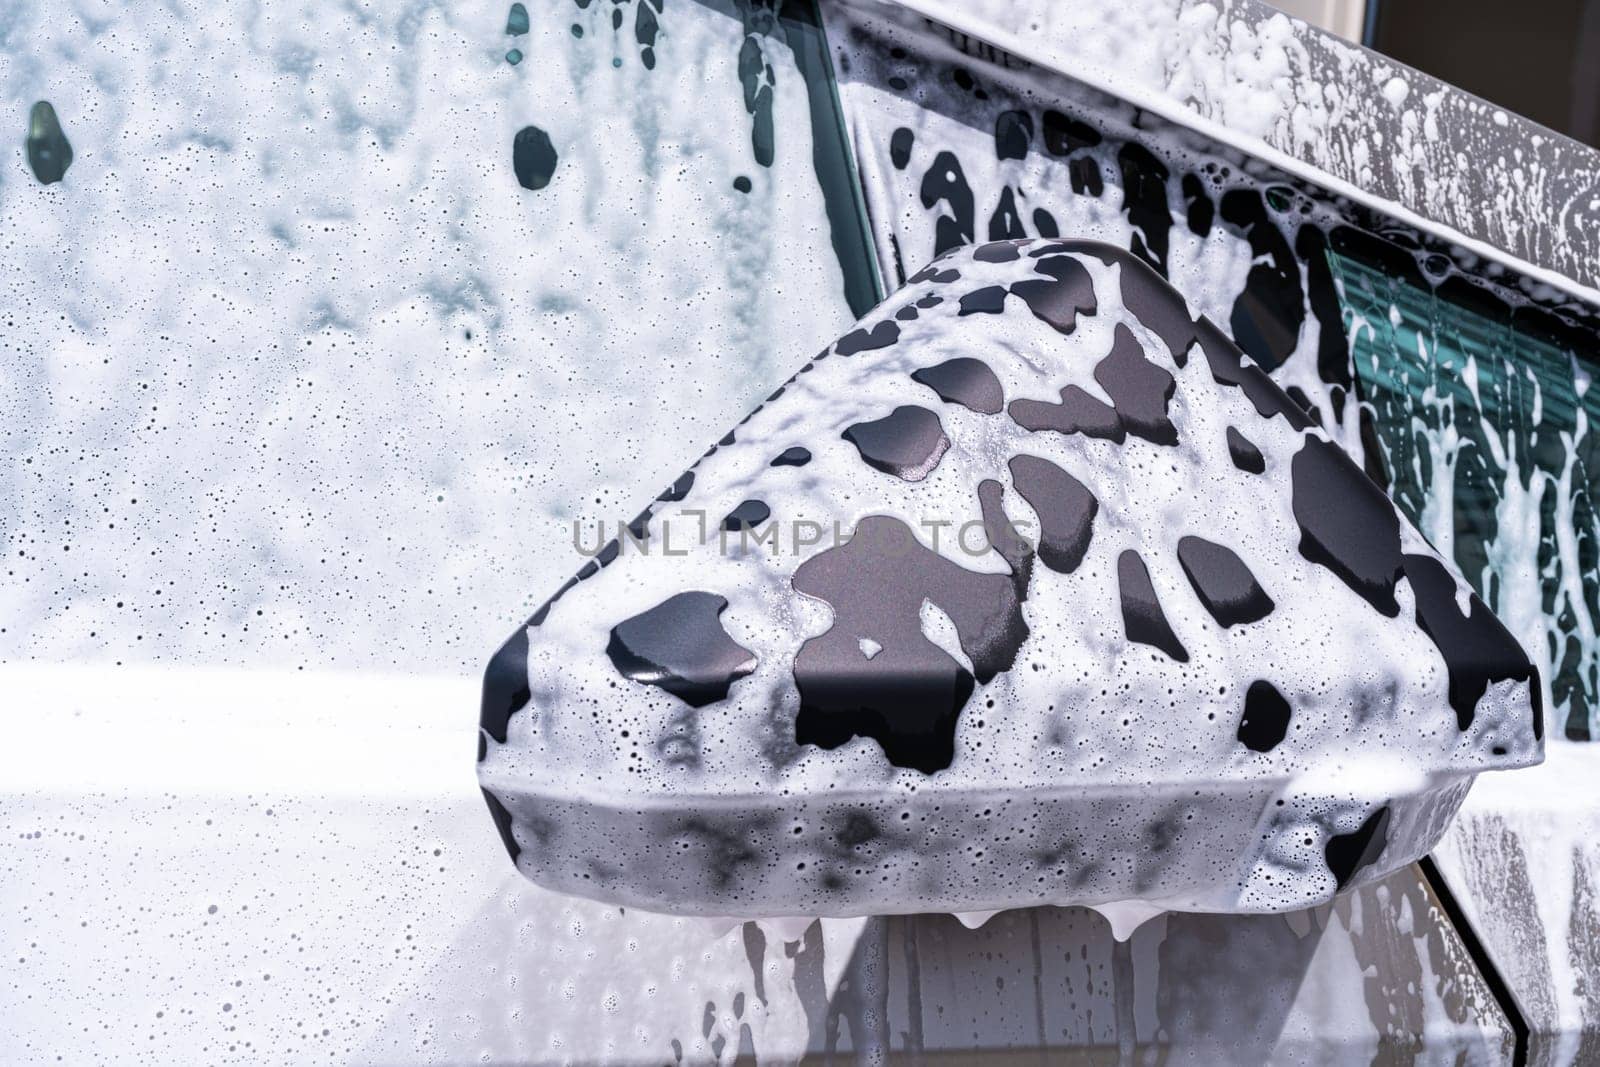 Denver, Colorado, USA-May 5, 2024-This image captures a close-up view of the Tesla Cybertruck side mirror covered in soap suds during a car wash, emphasizing the vehicle unique angular design and rugged exterior.